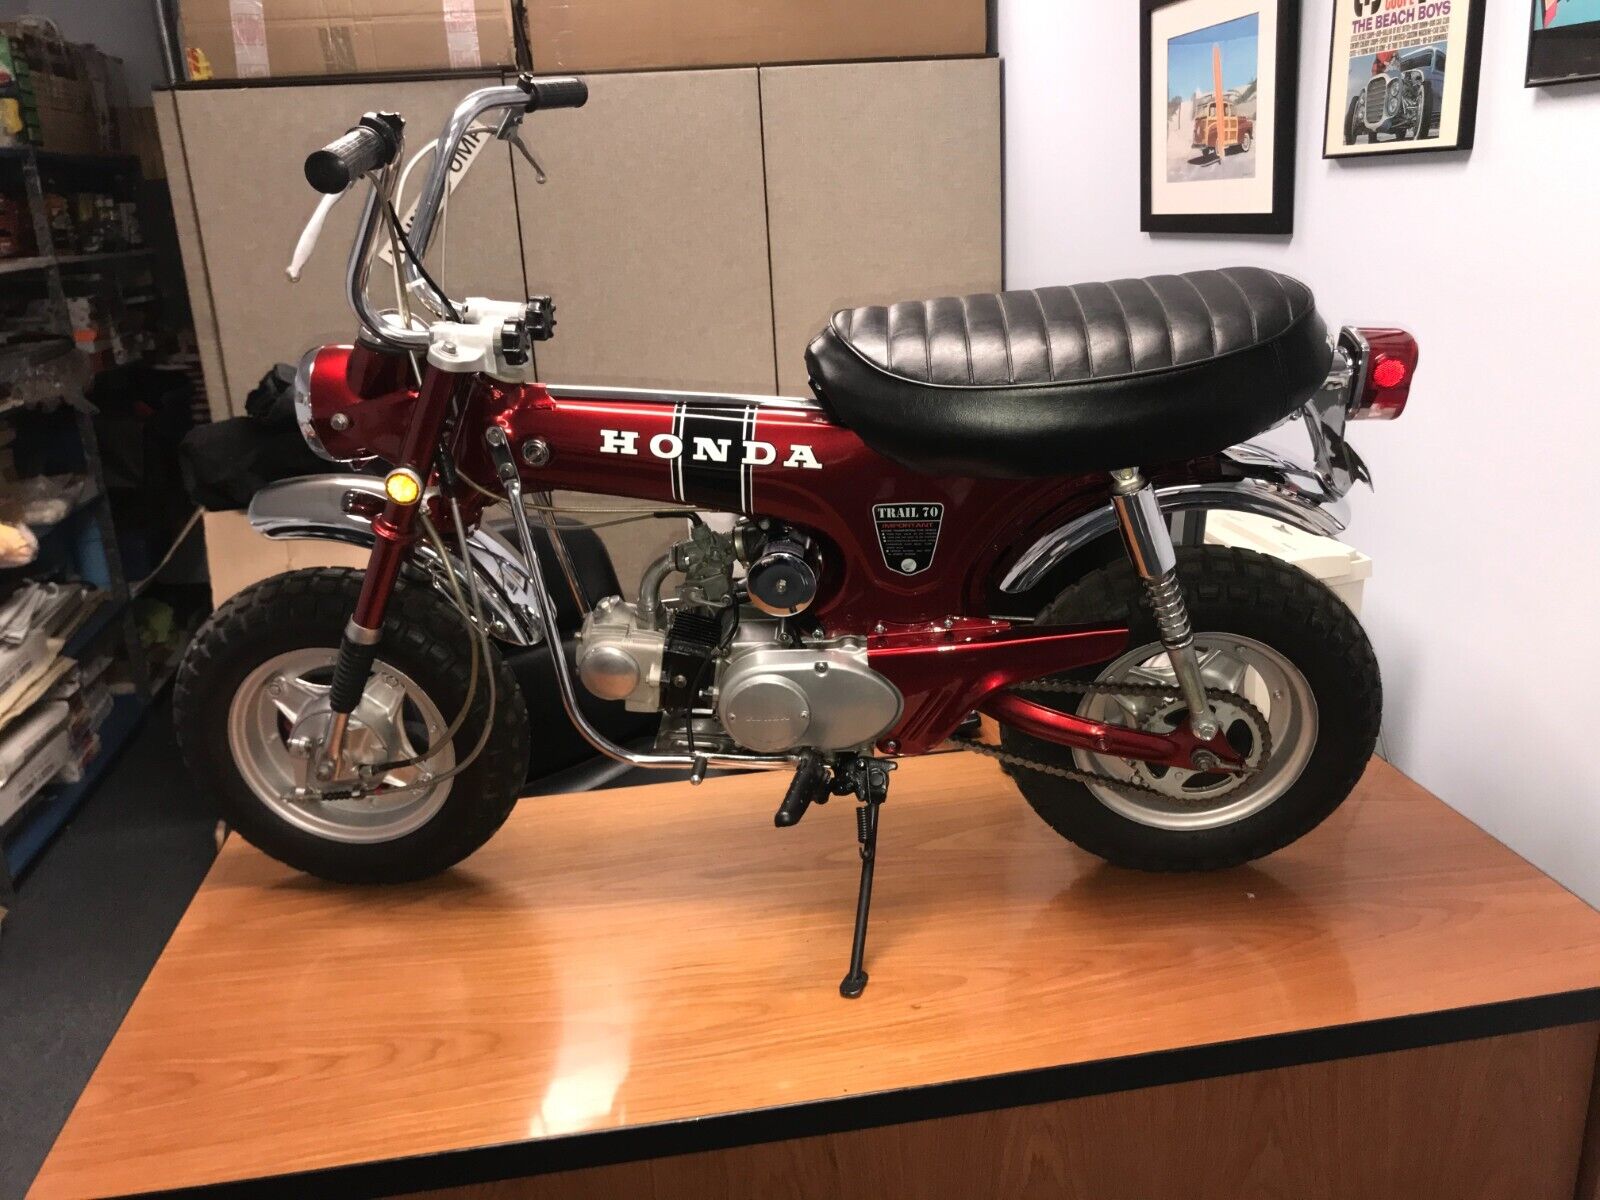 1970 Honda ct70 Trail Motorcycle - Candy Ruby Red